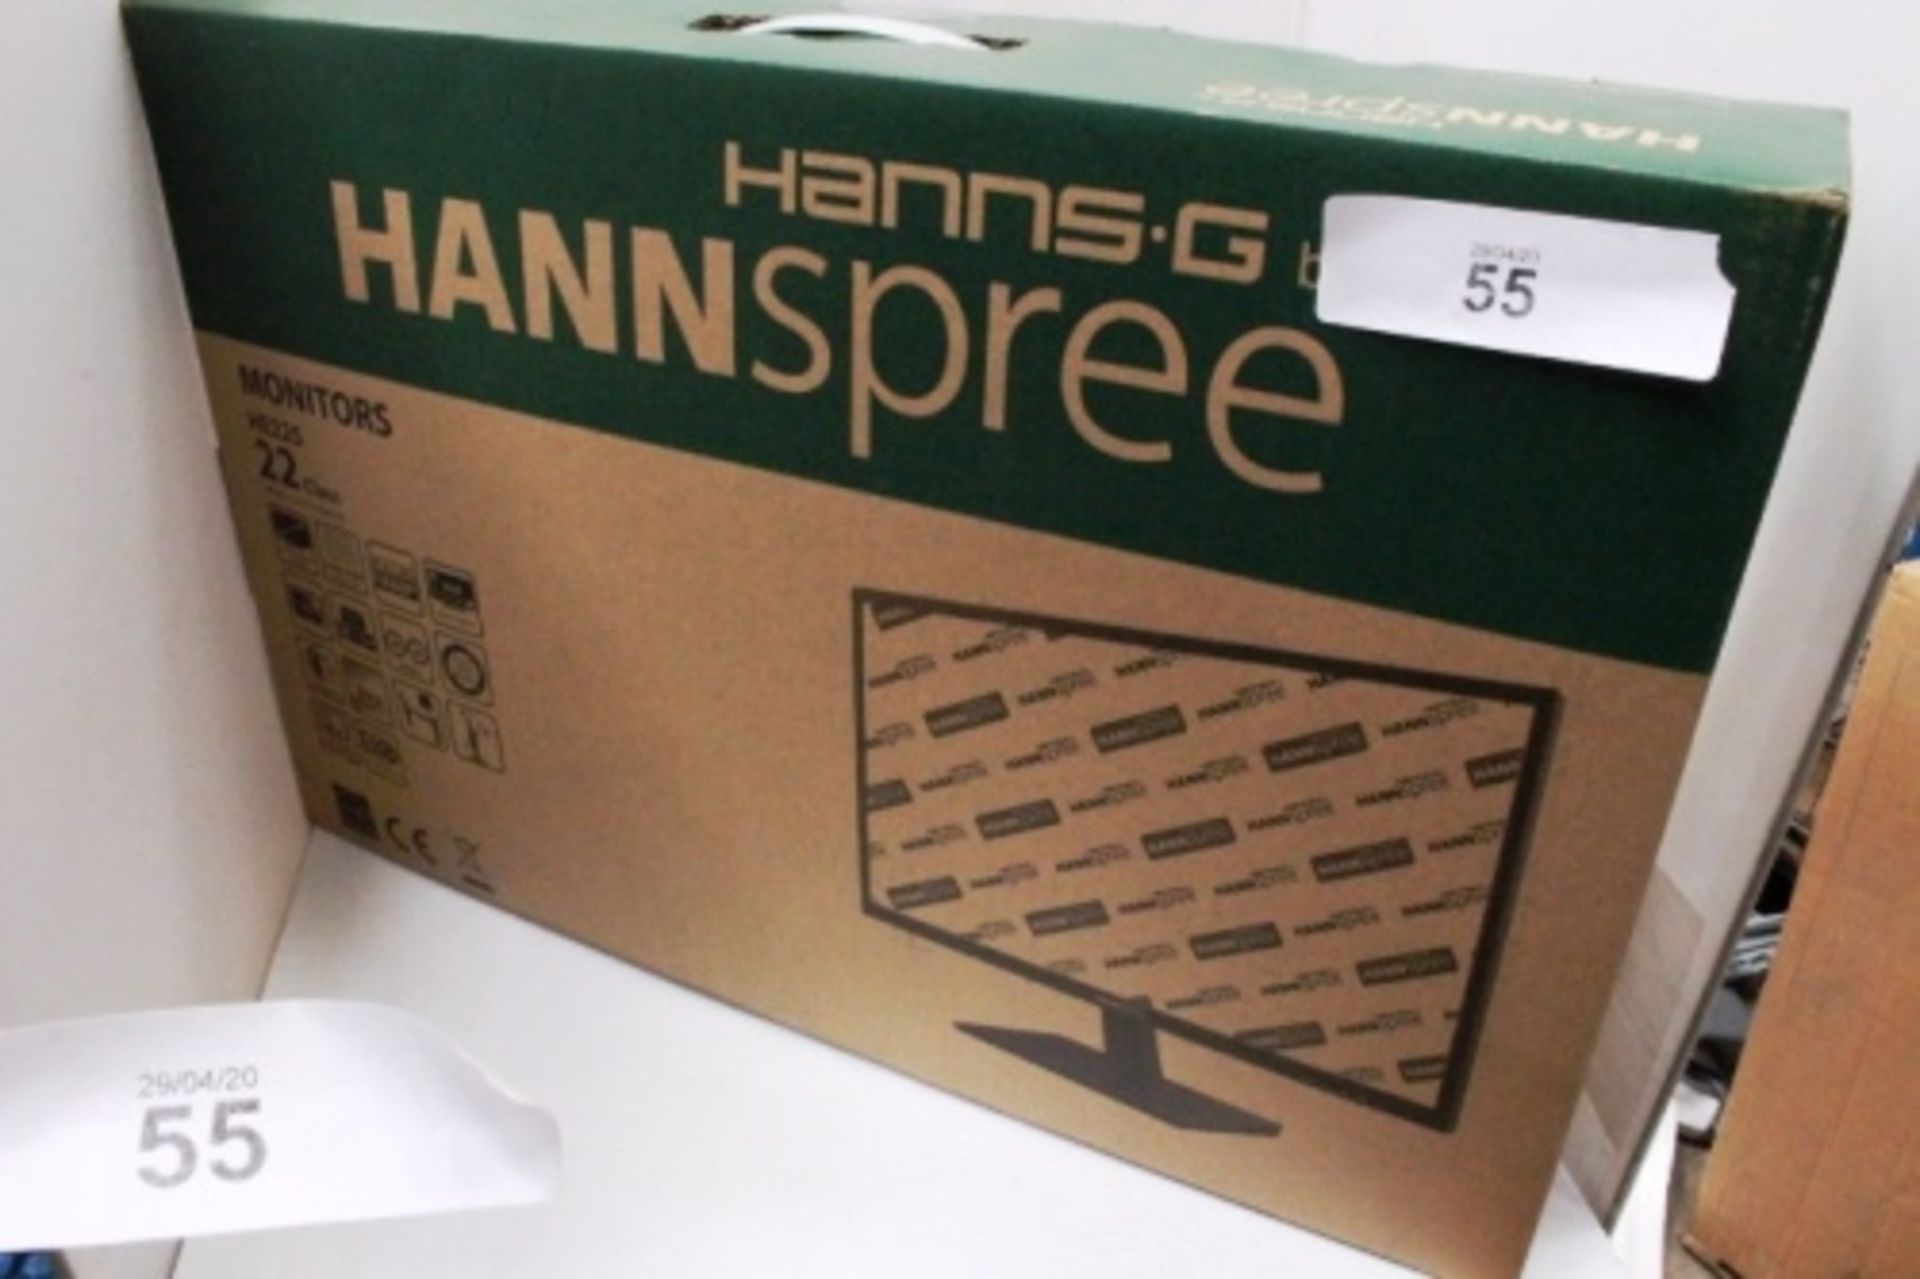 A HannsG LCD 22" monitor, model HSG1313+ - Sealed new in box (ES3) - Image 2 of 2